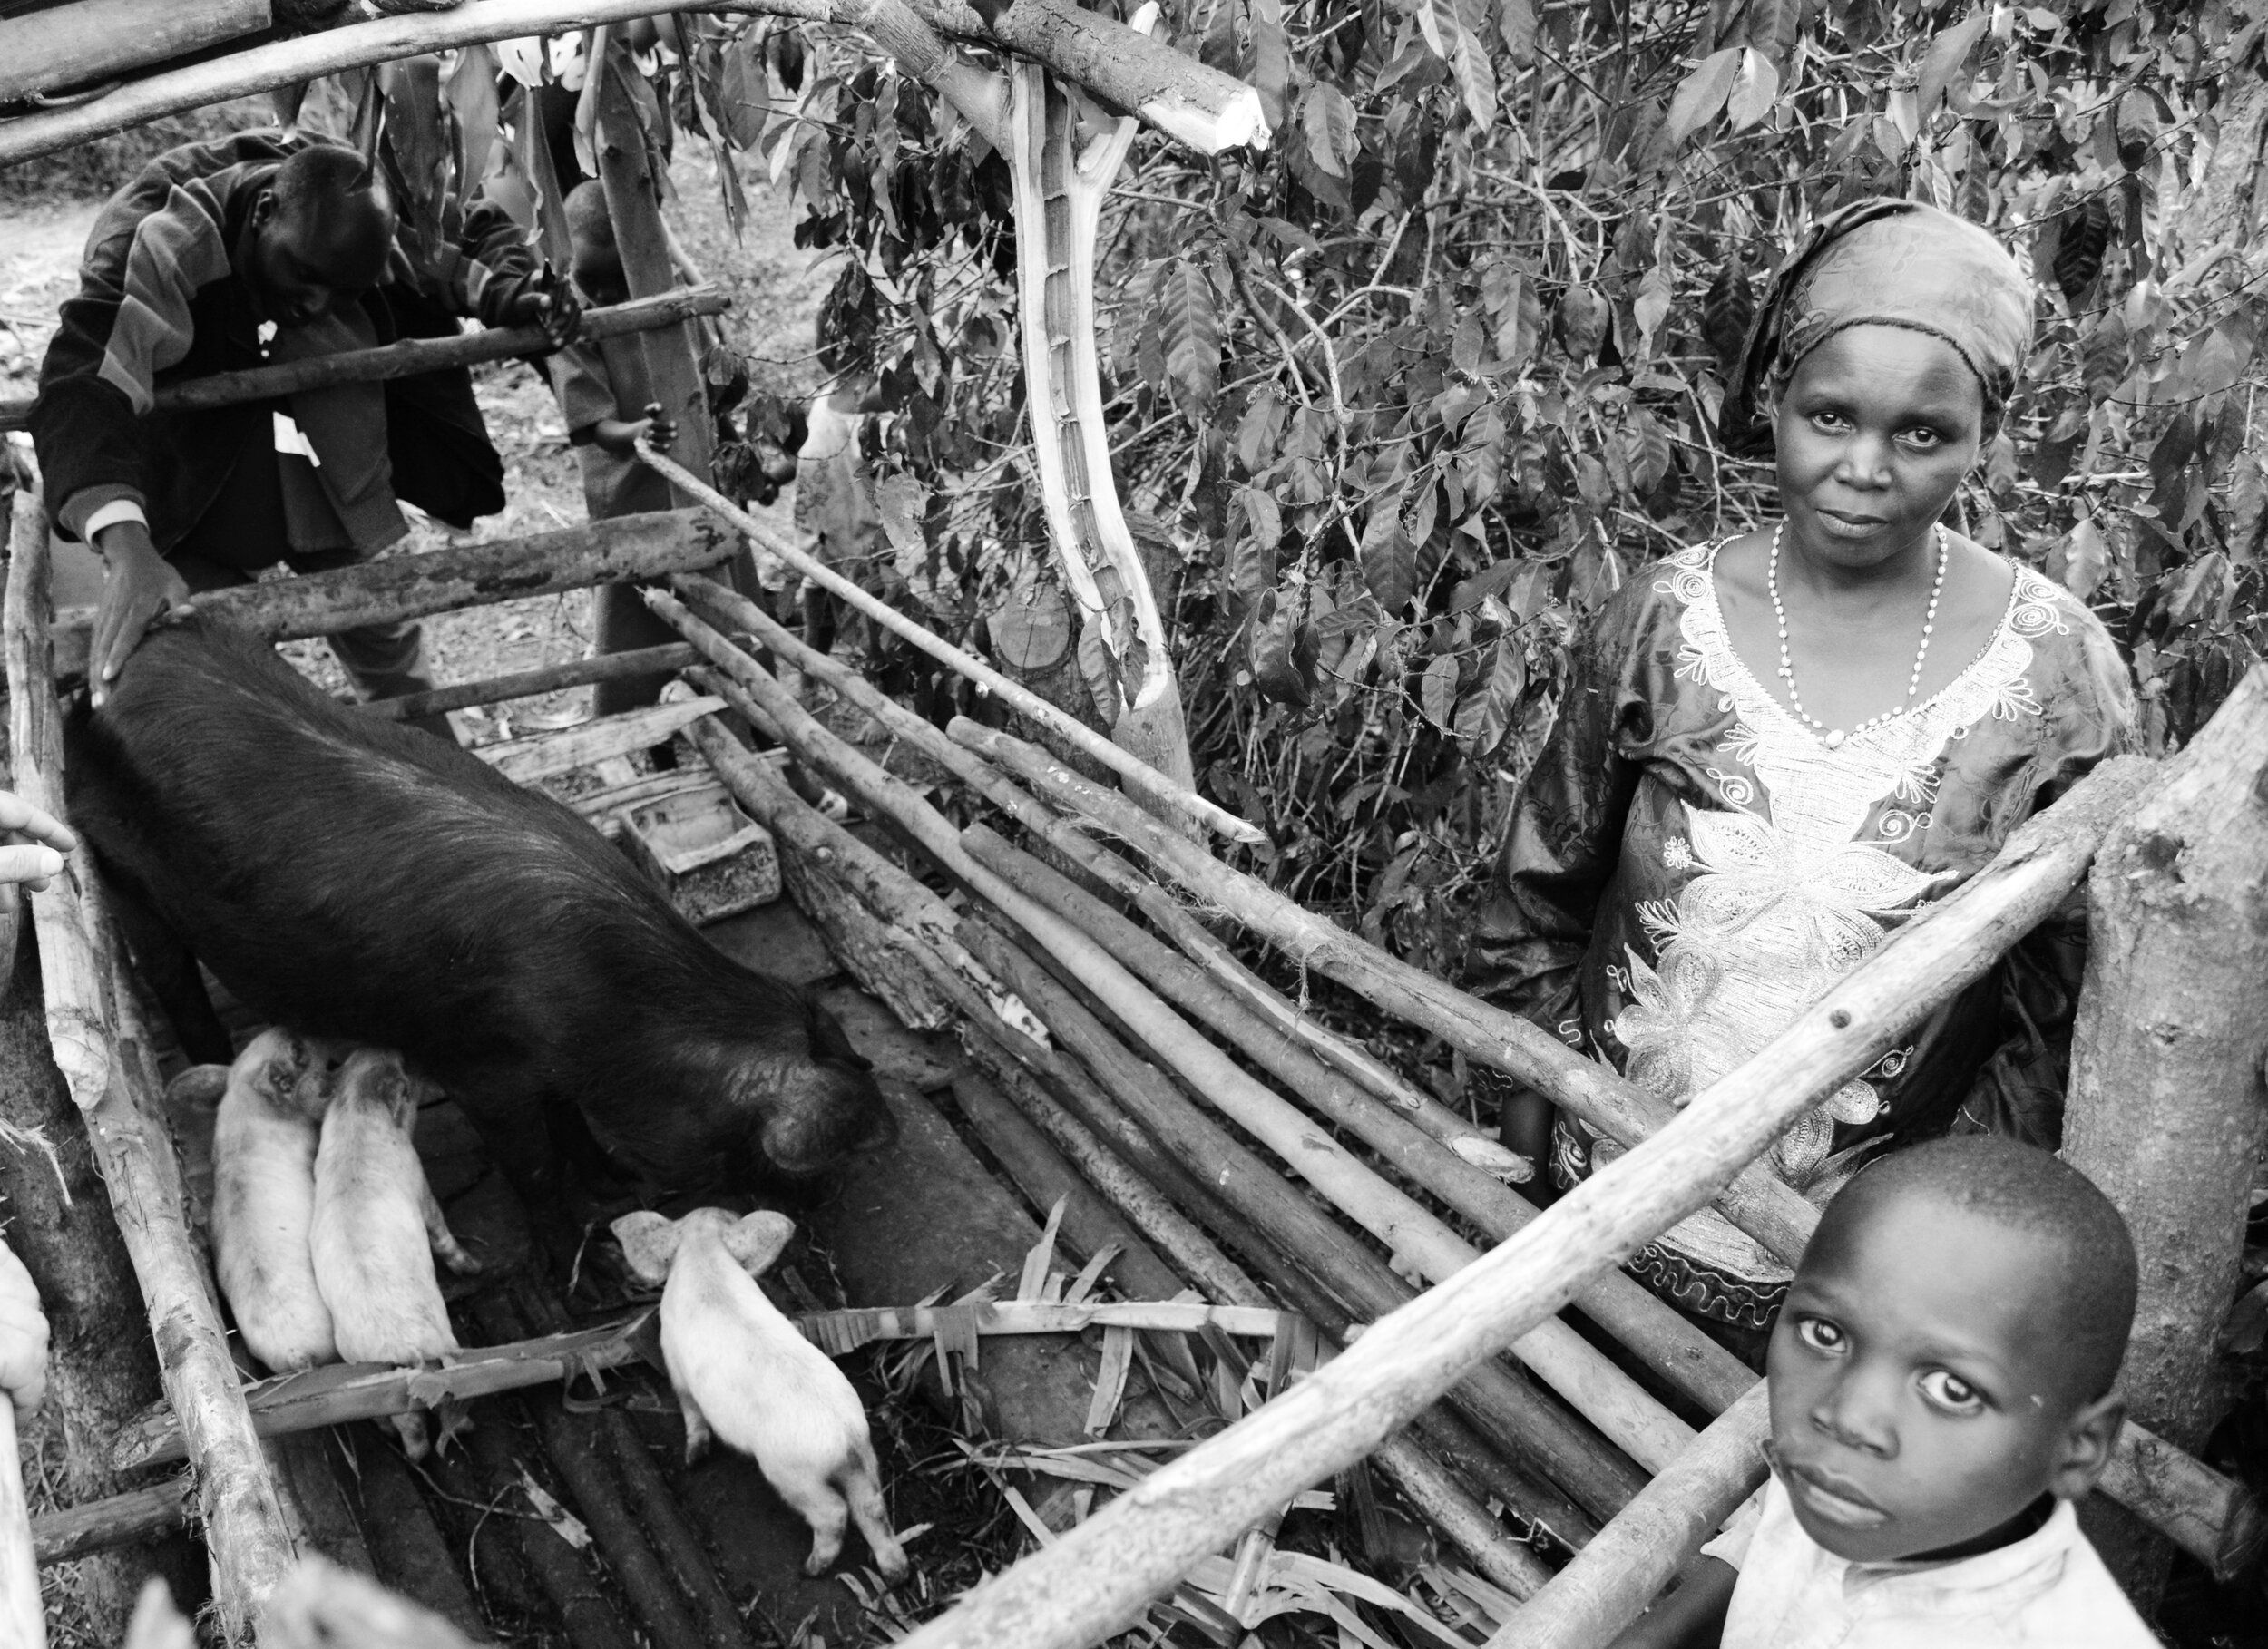  People living in rural areas often rely on agriculture as a form of subsistence farming.  